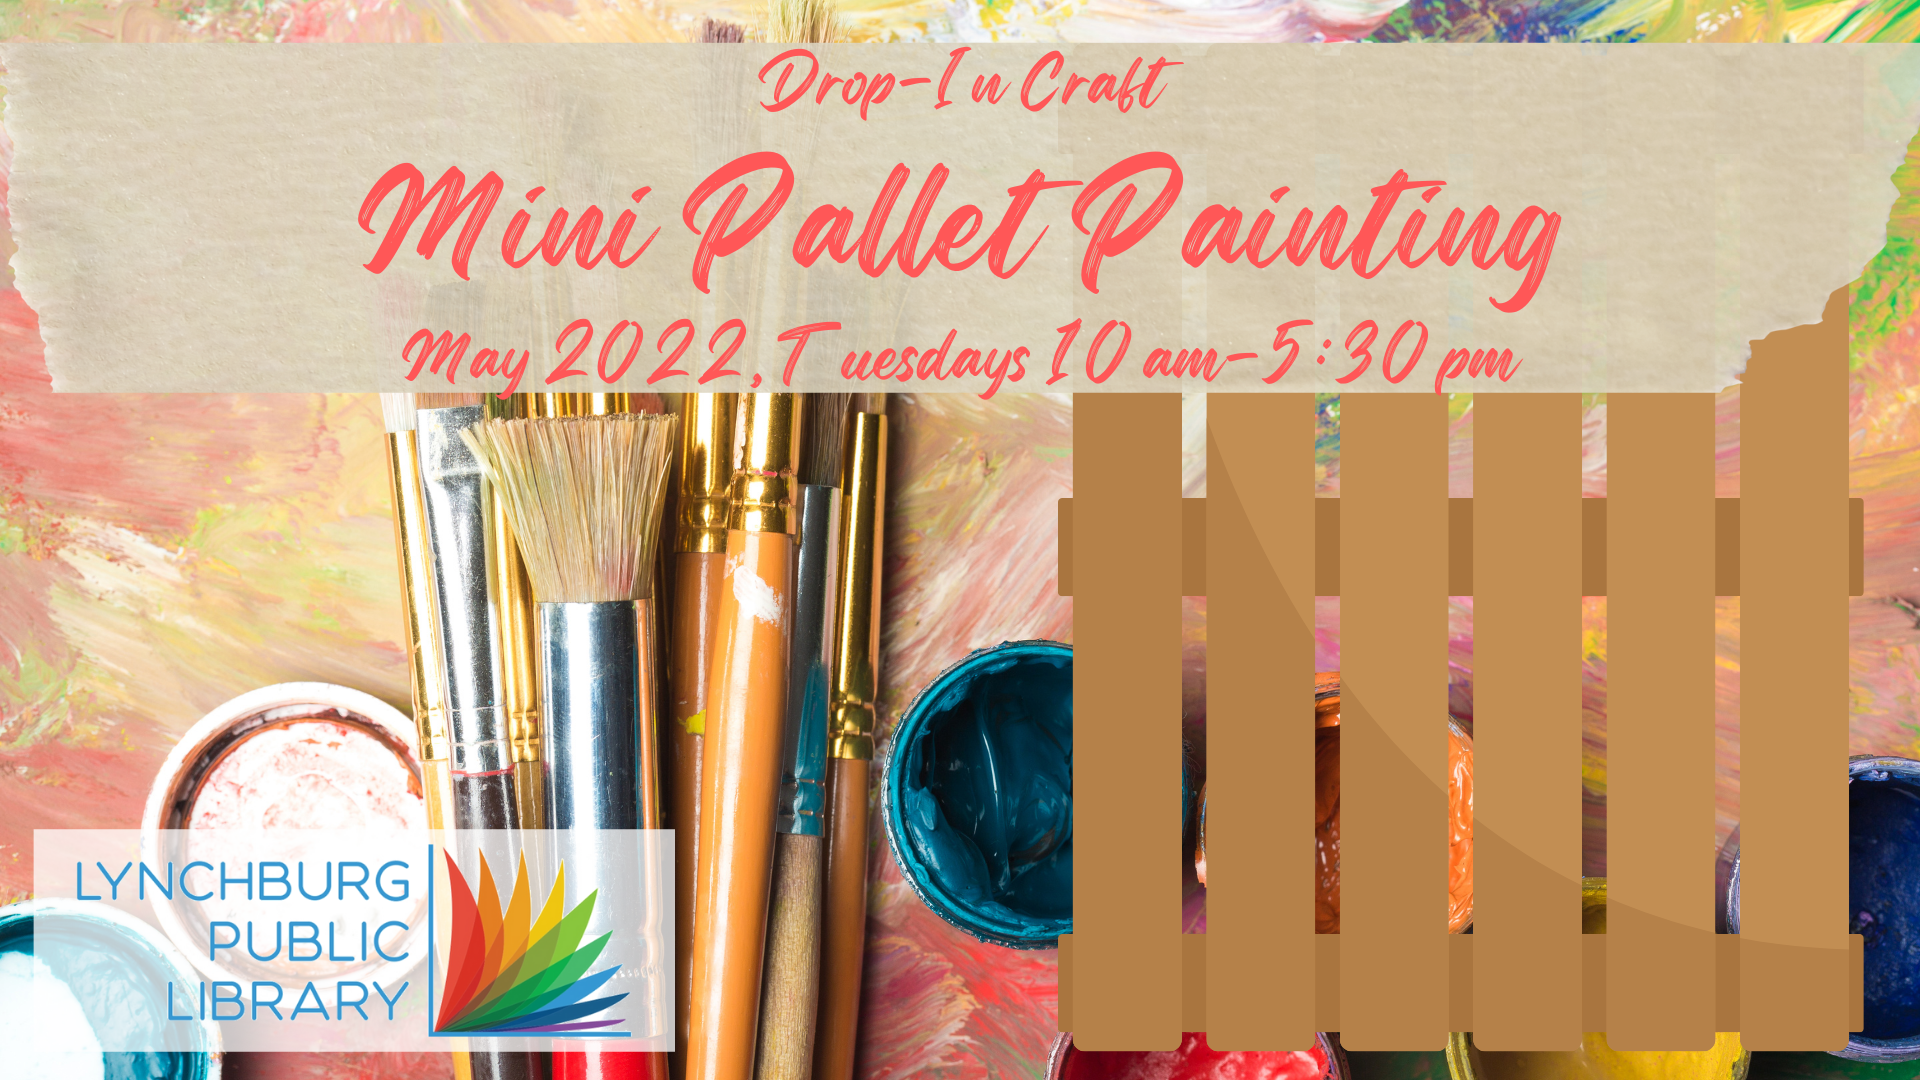 Drop-In Craft, Mini Pallet Painting, May 2022, Tuesdays 10 am-5:30 pm